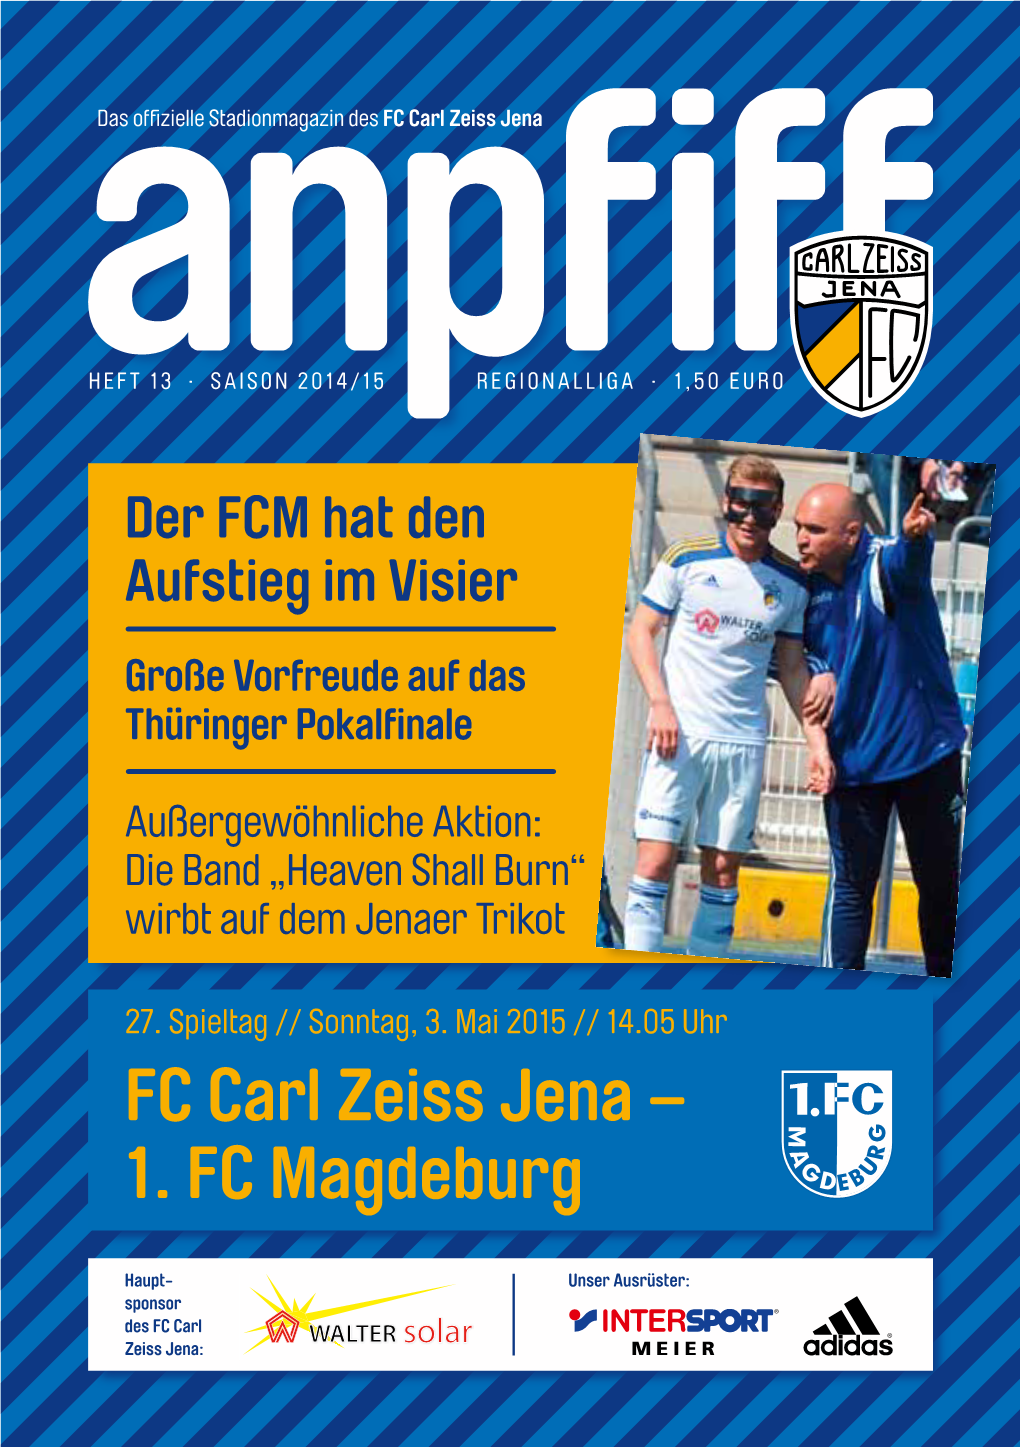 FC Carl Zeiss Jena – 1. FC Magdeburg